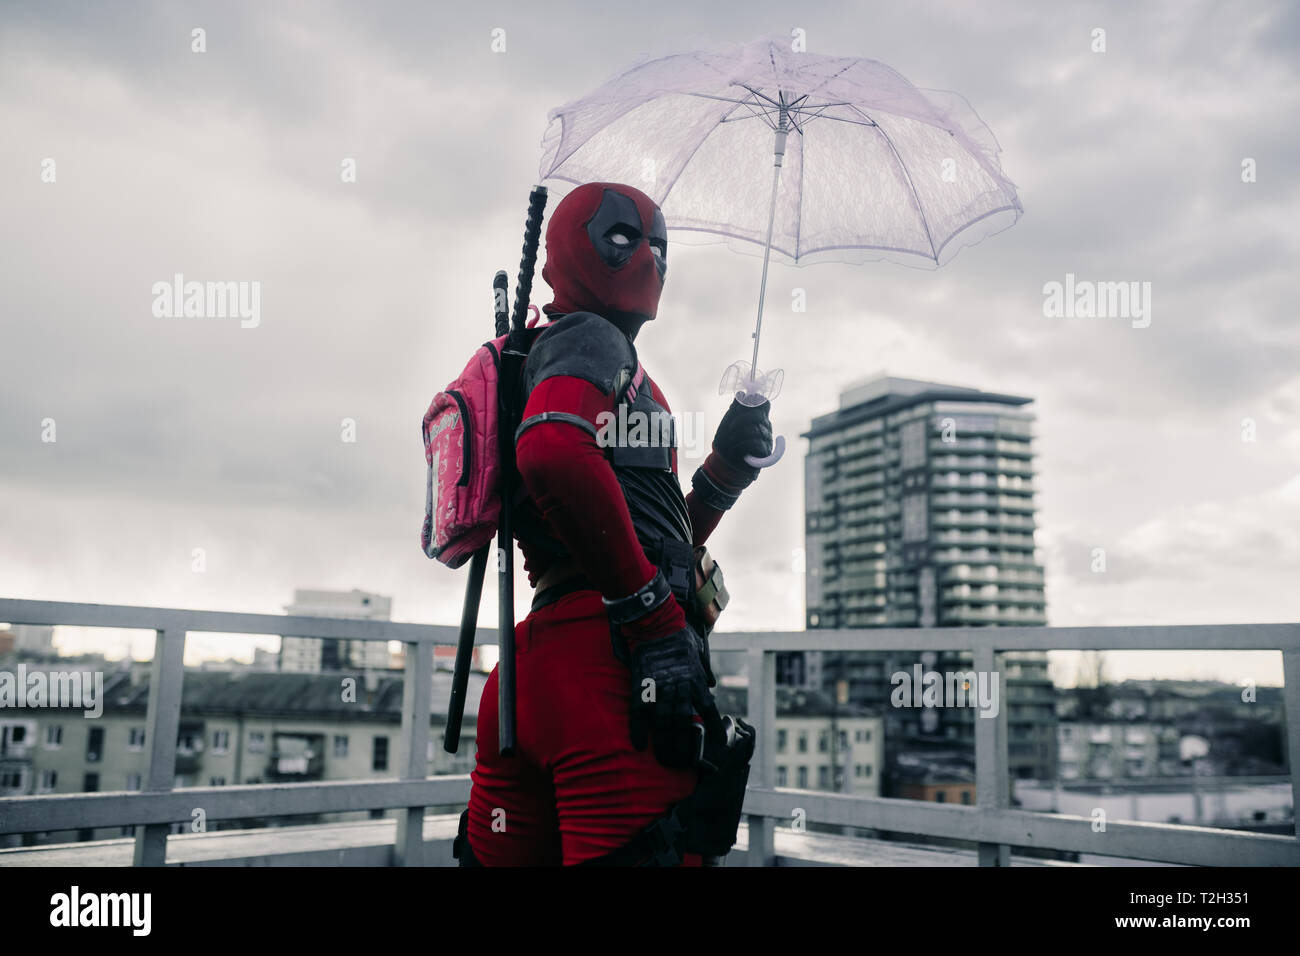 Umbrella Man Movie High Resolution Stock Photography and Images - Alamy